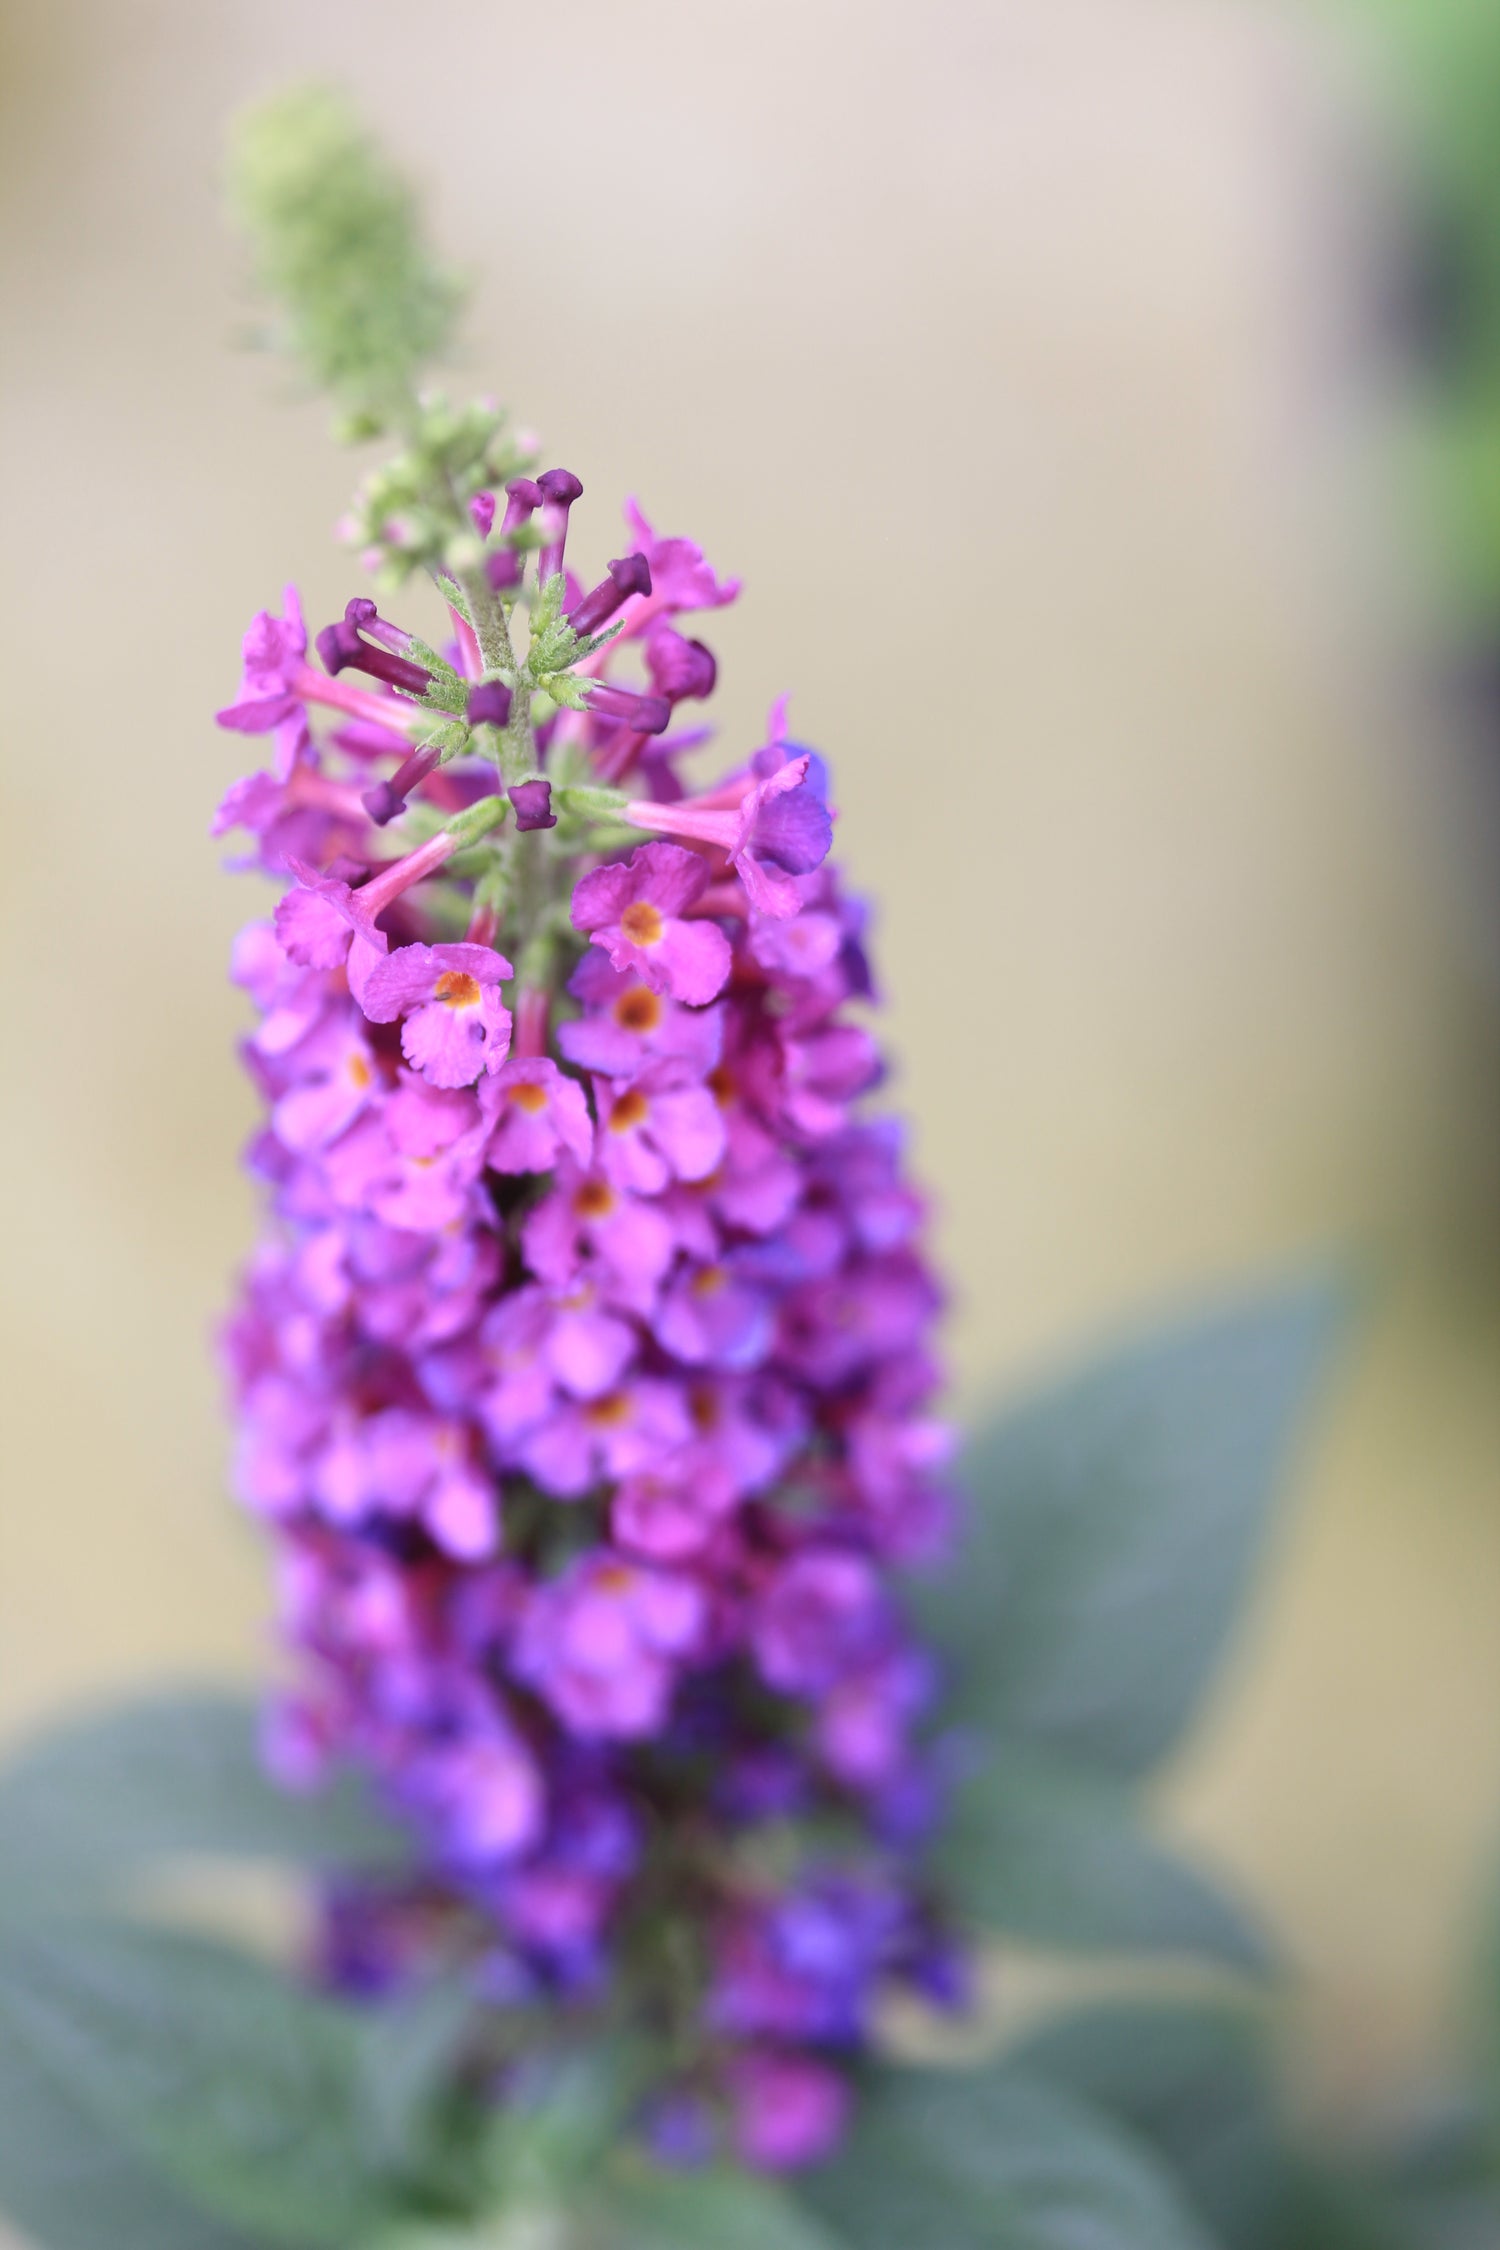 Buddleia Miss Violet is approved for sale in Oregon and Washington 